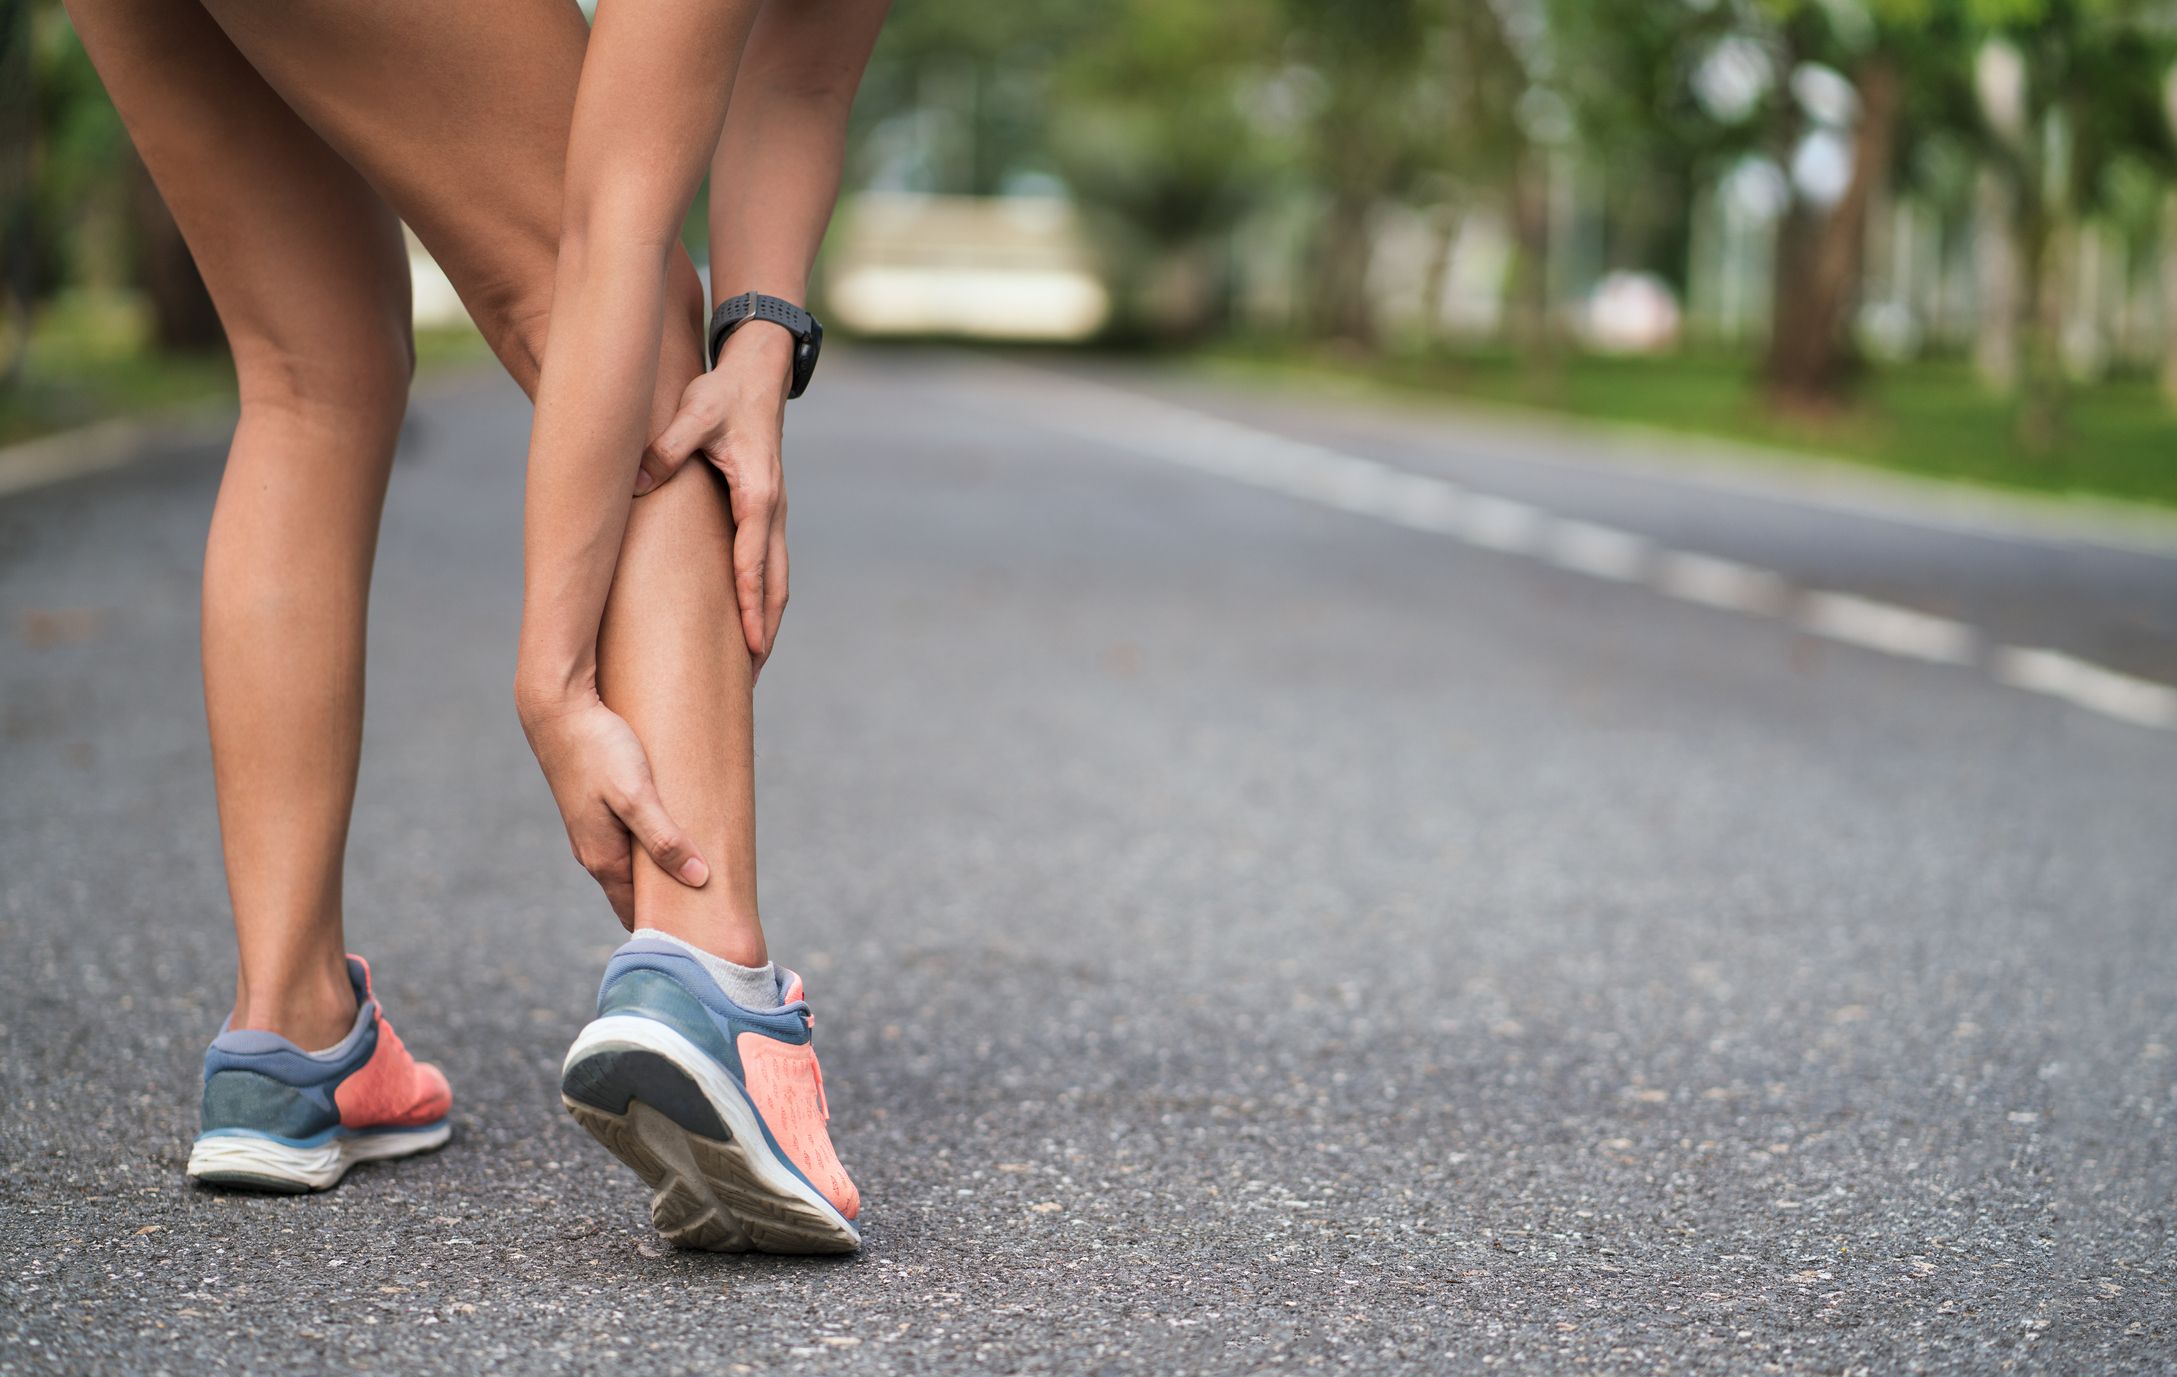 Posterior Tibial Tendonitis: Signs and Treatment